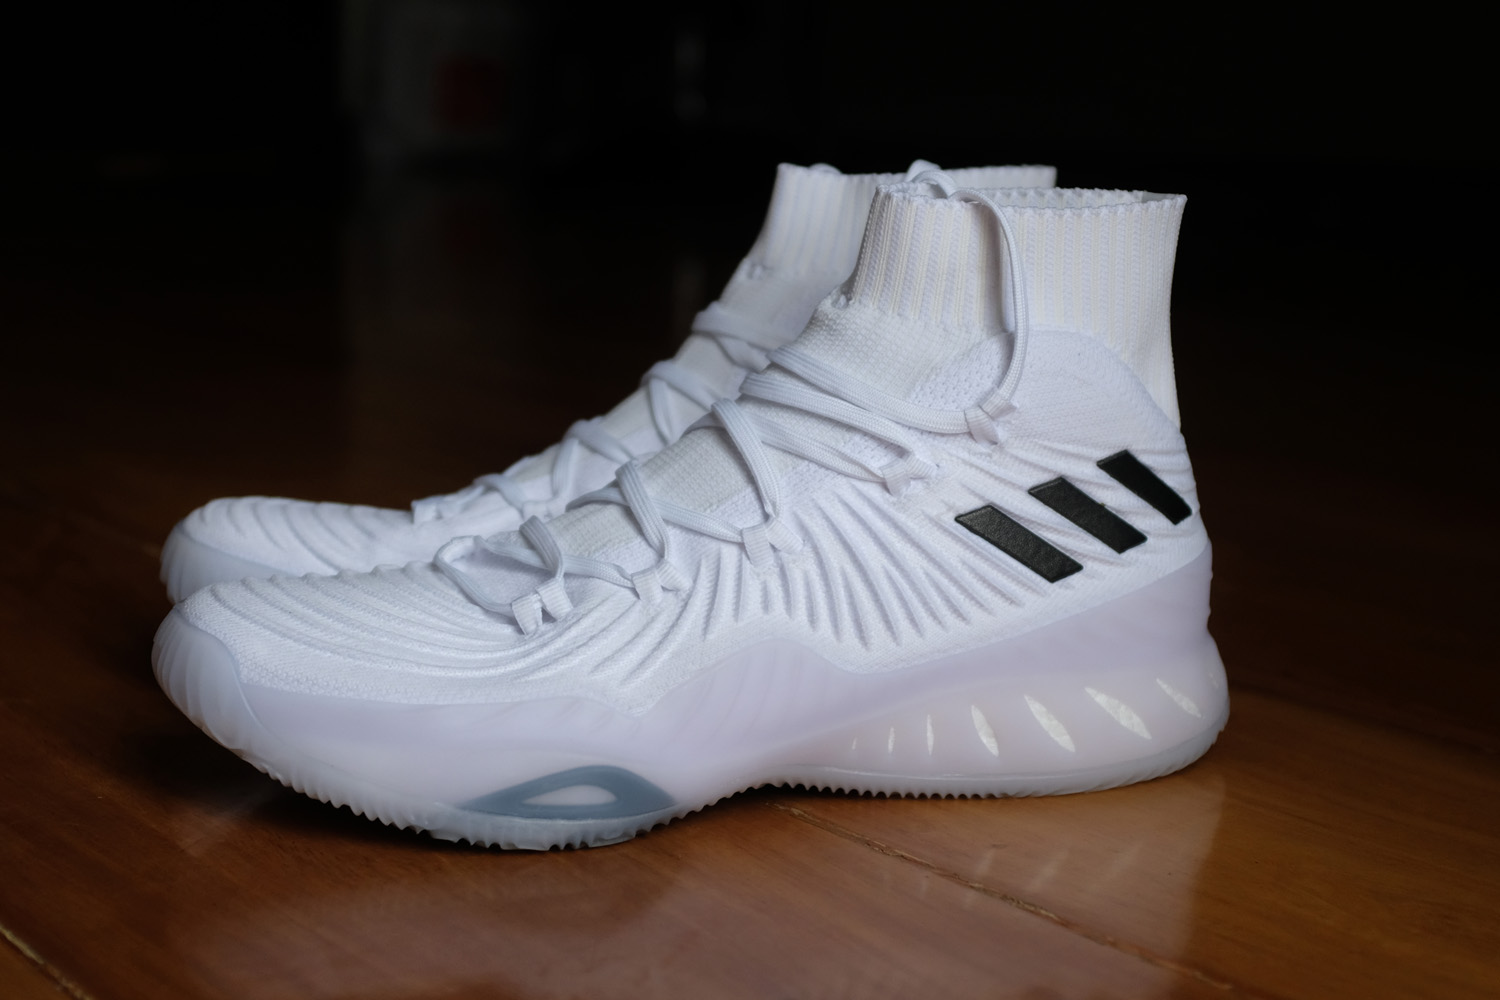 adidas crazy explosive low 2017 performance review